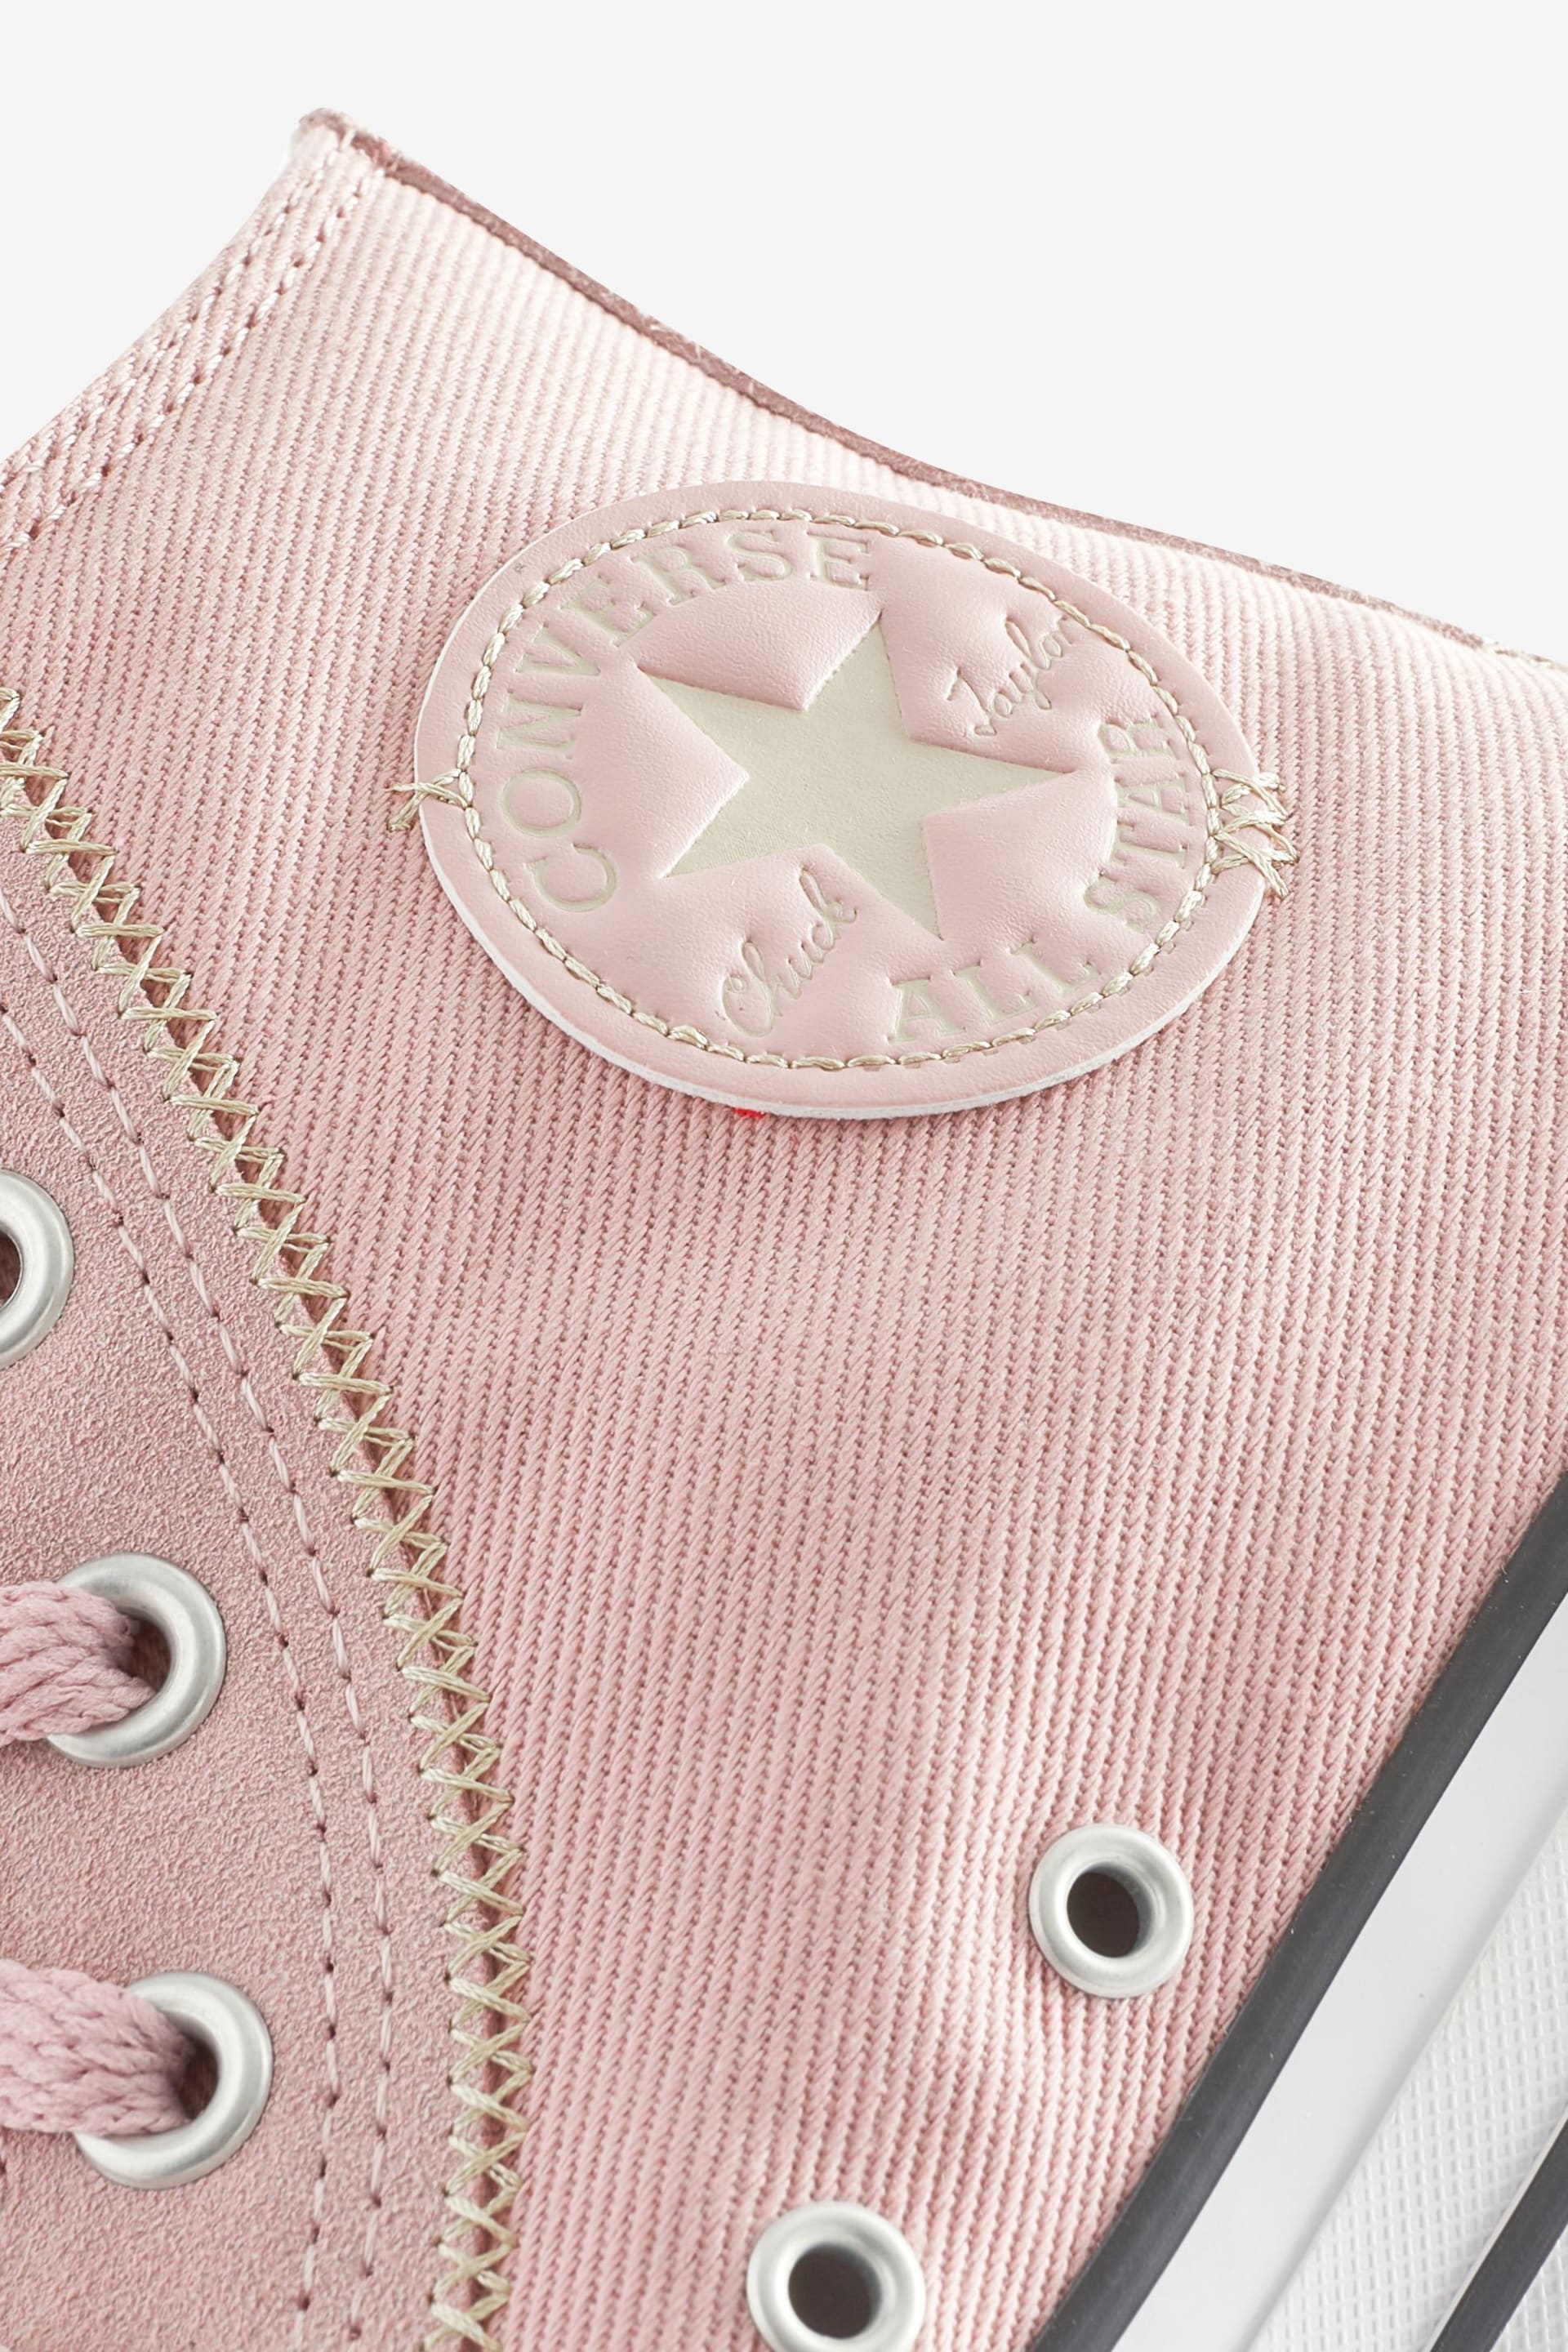 Converse Pink/White Chuck Taylor All Star High Top Trainers - Image 9 of 9